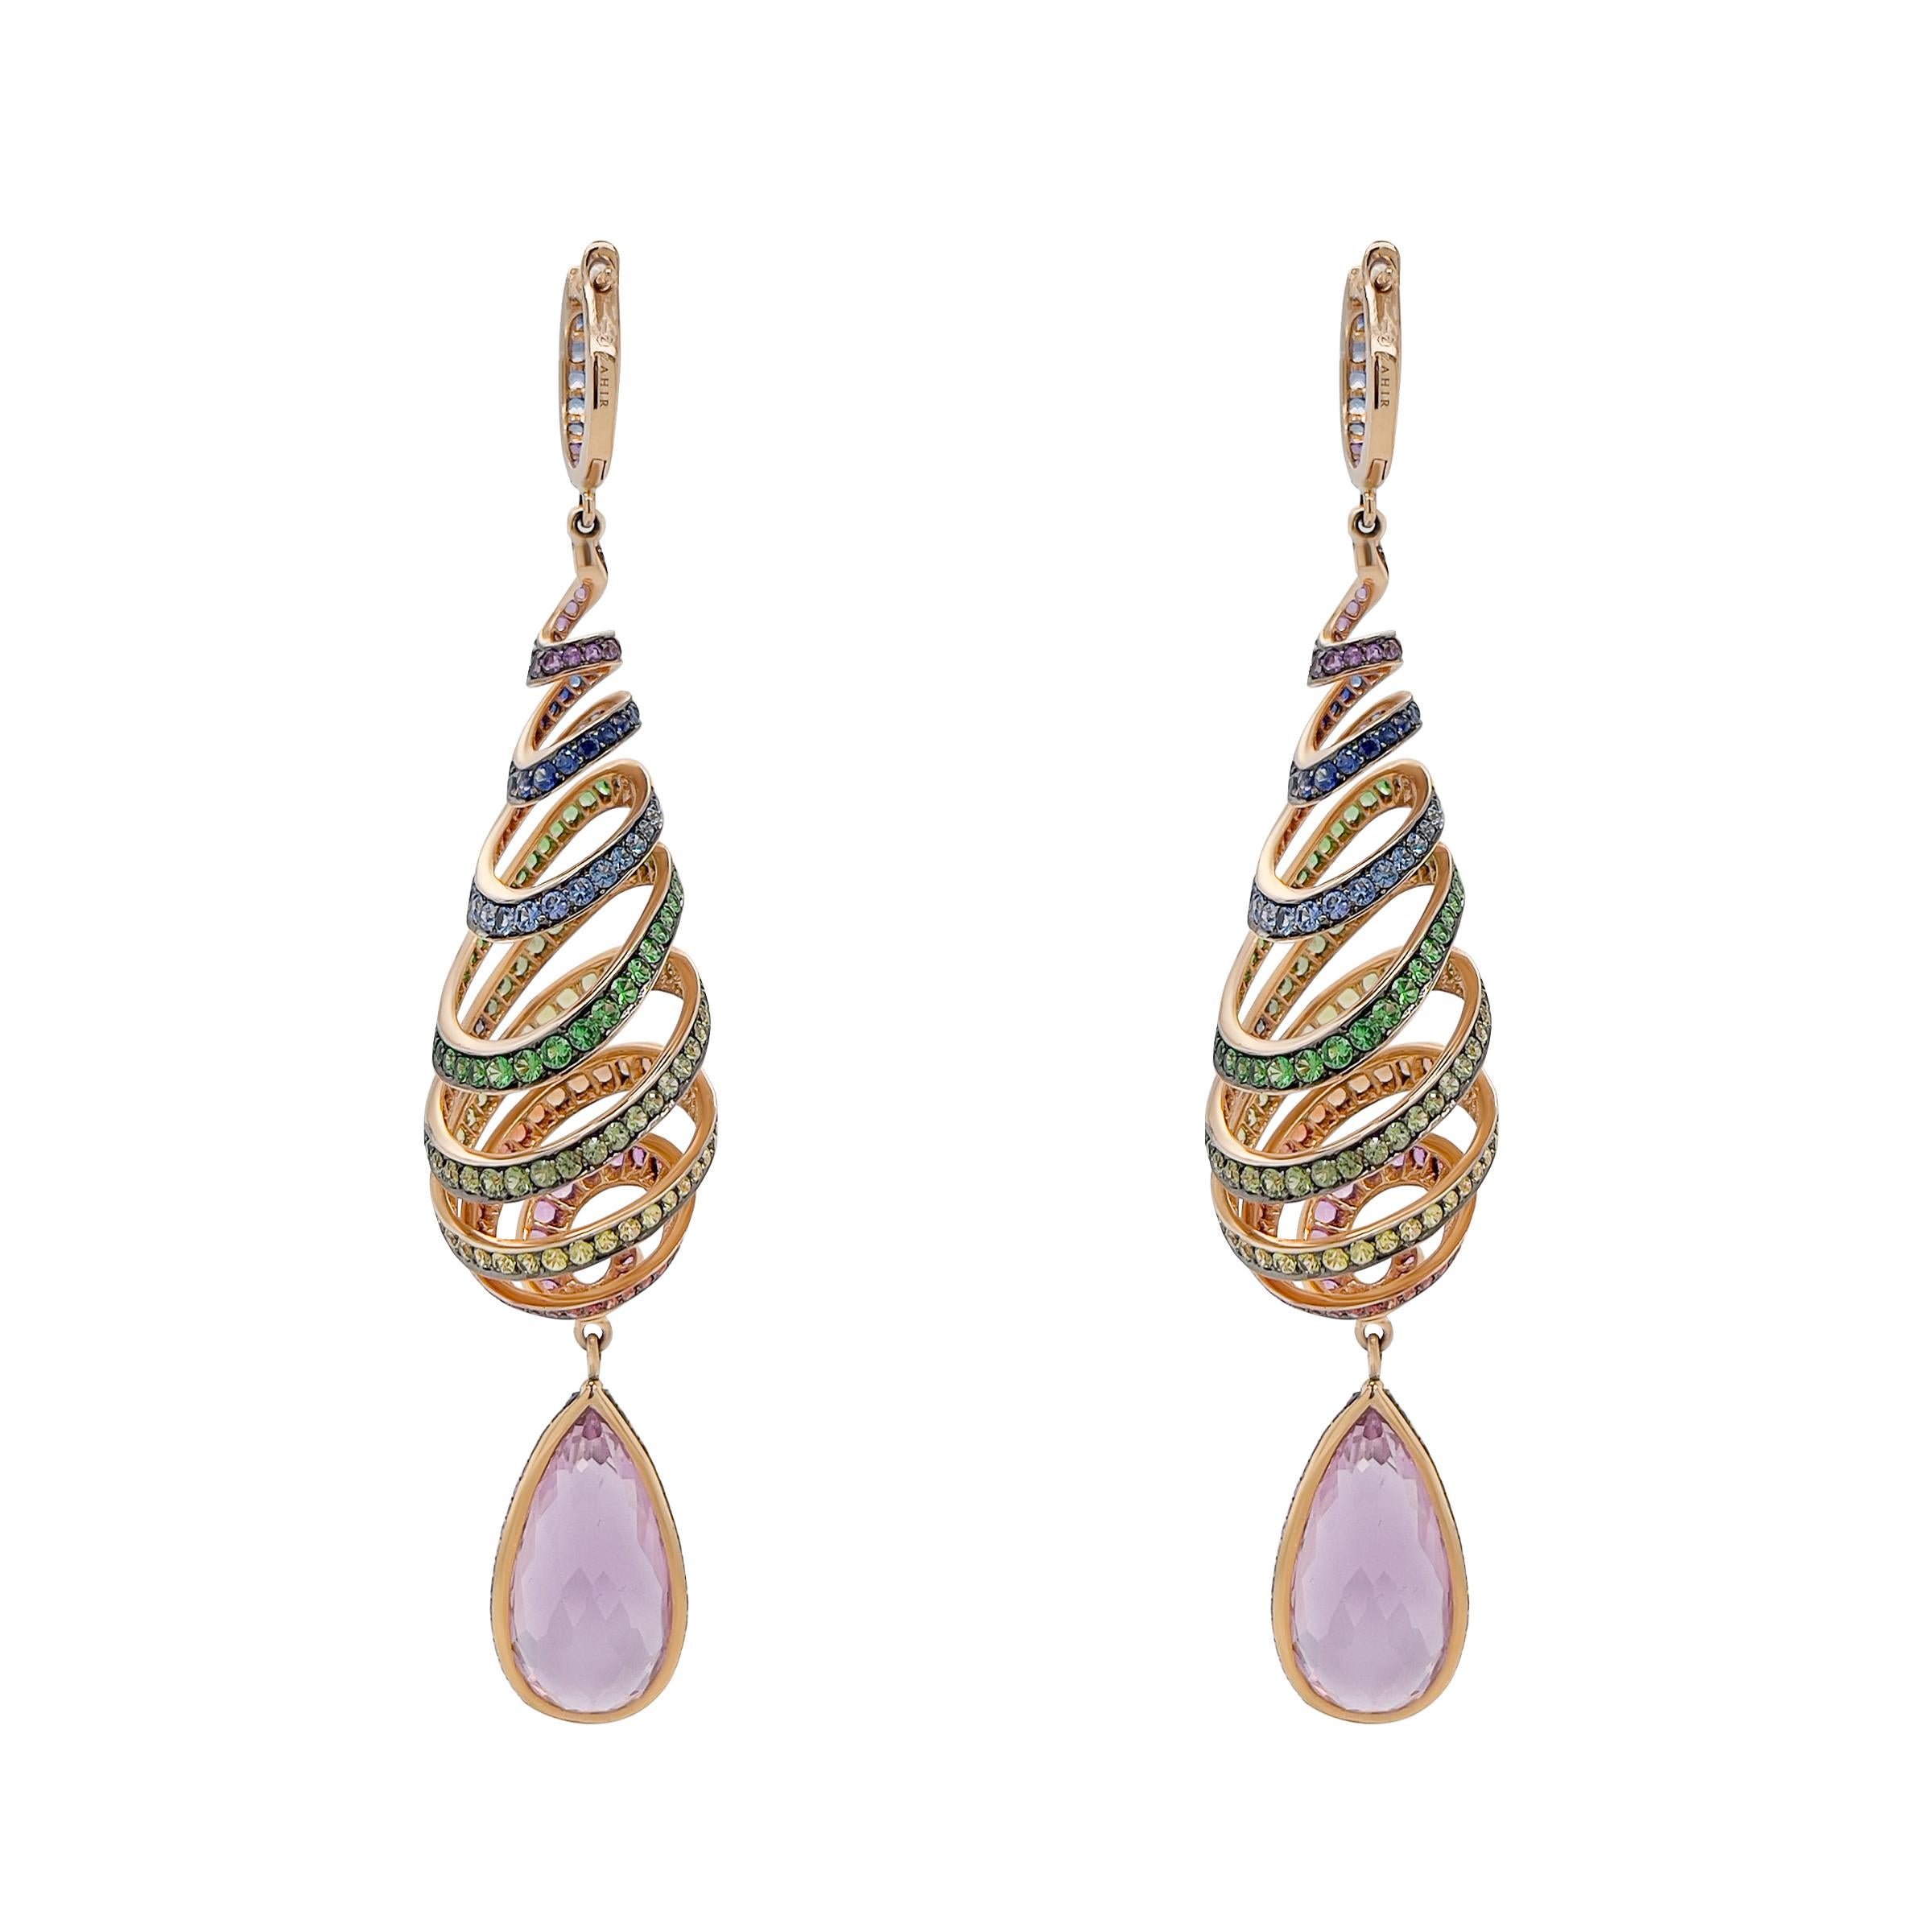 This pair of long 18k pink gold and coloured gemstone earrings are the heart of a three piece set. The teardrop spiral design was carefully and expertly crafted to ensure strength and moveability. The NATURAL coloured stones, including